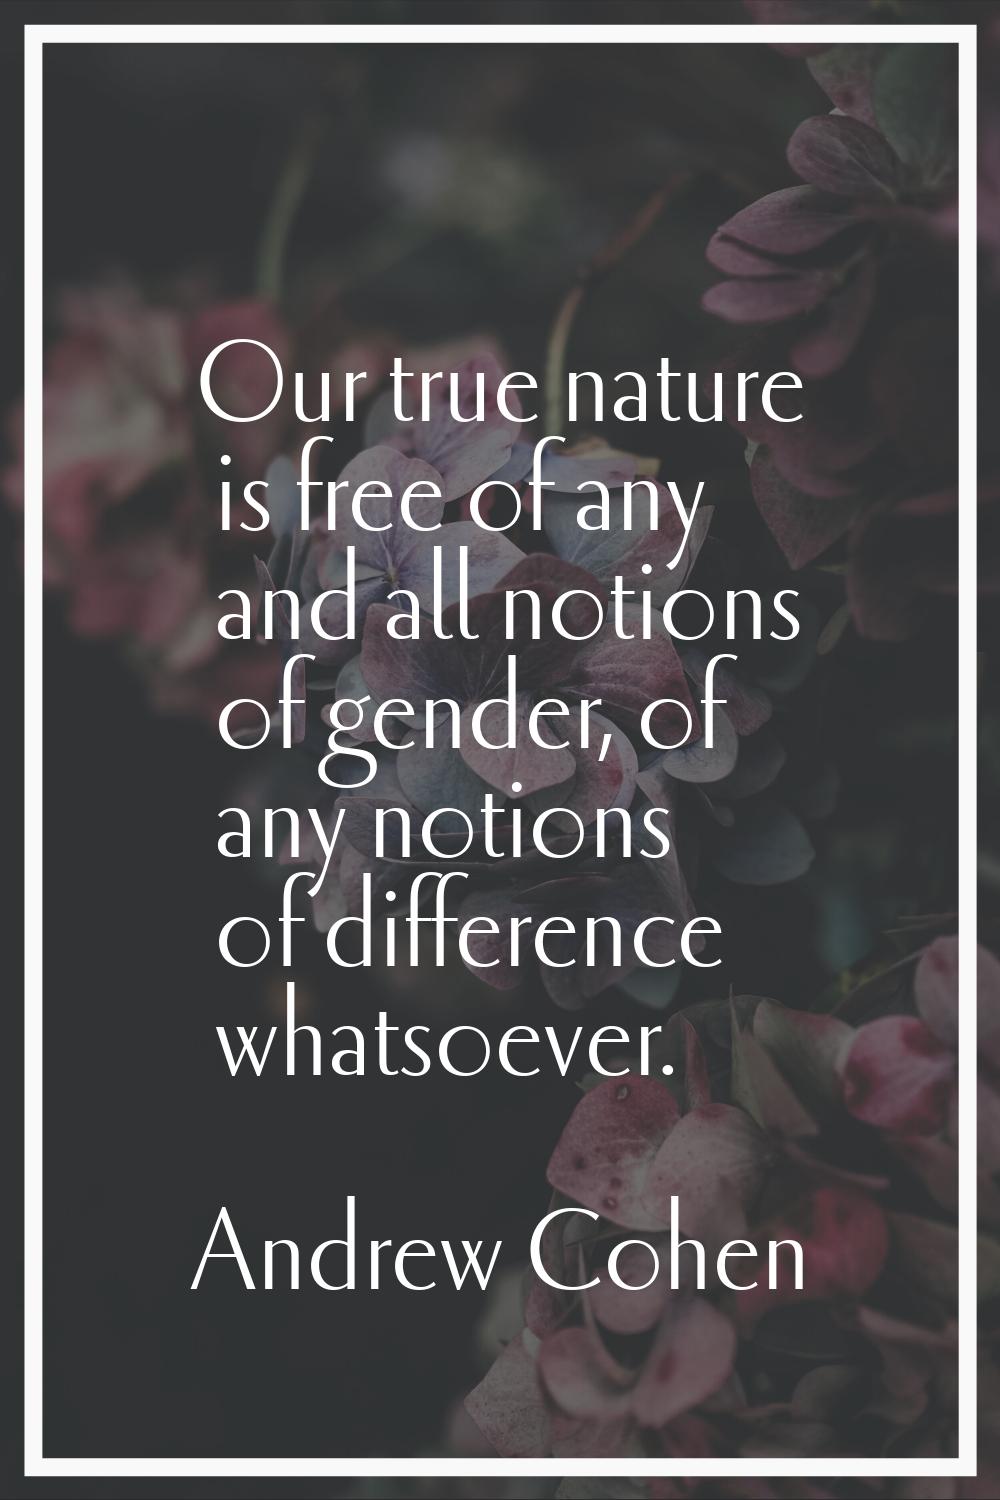 Our true nature is free of any and all notions of gender, of any notions of difference whatsoever.